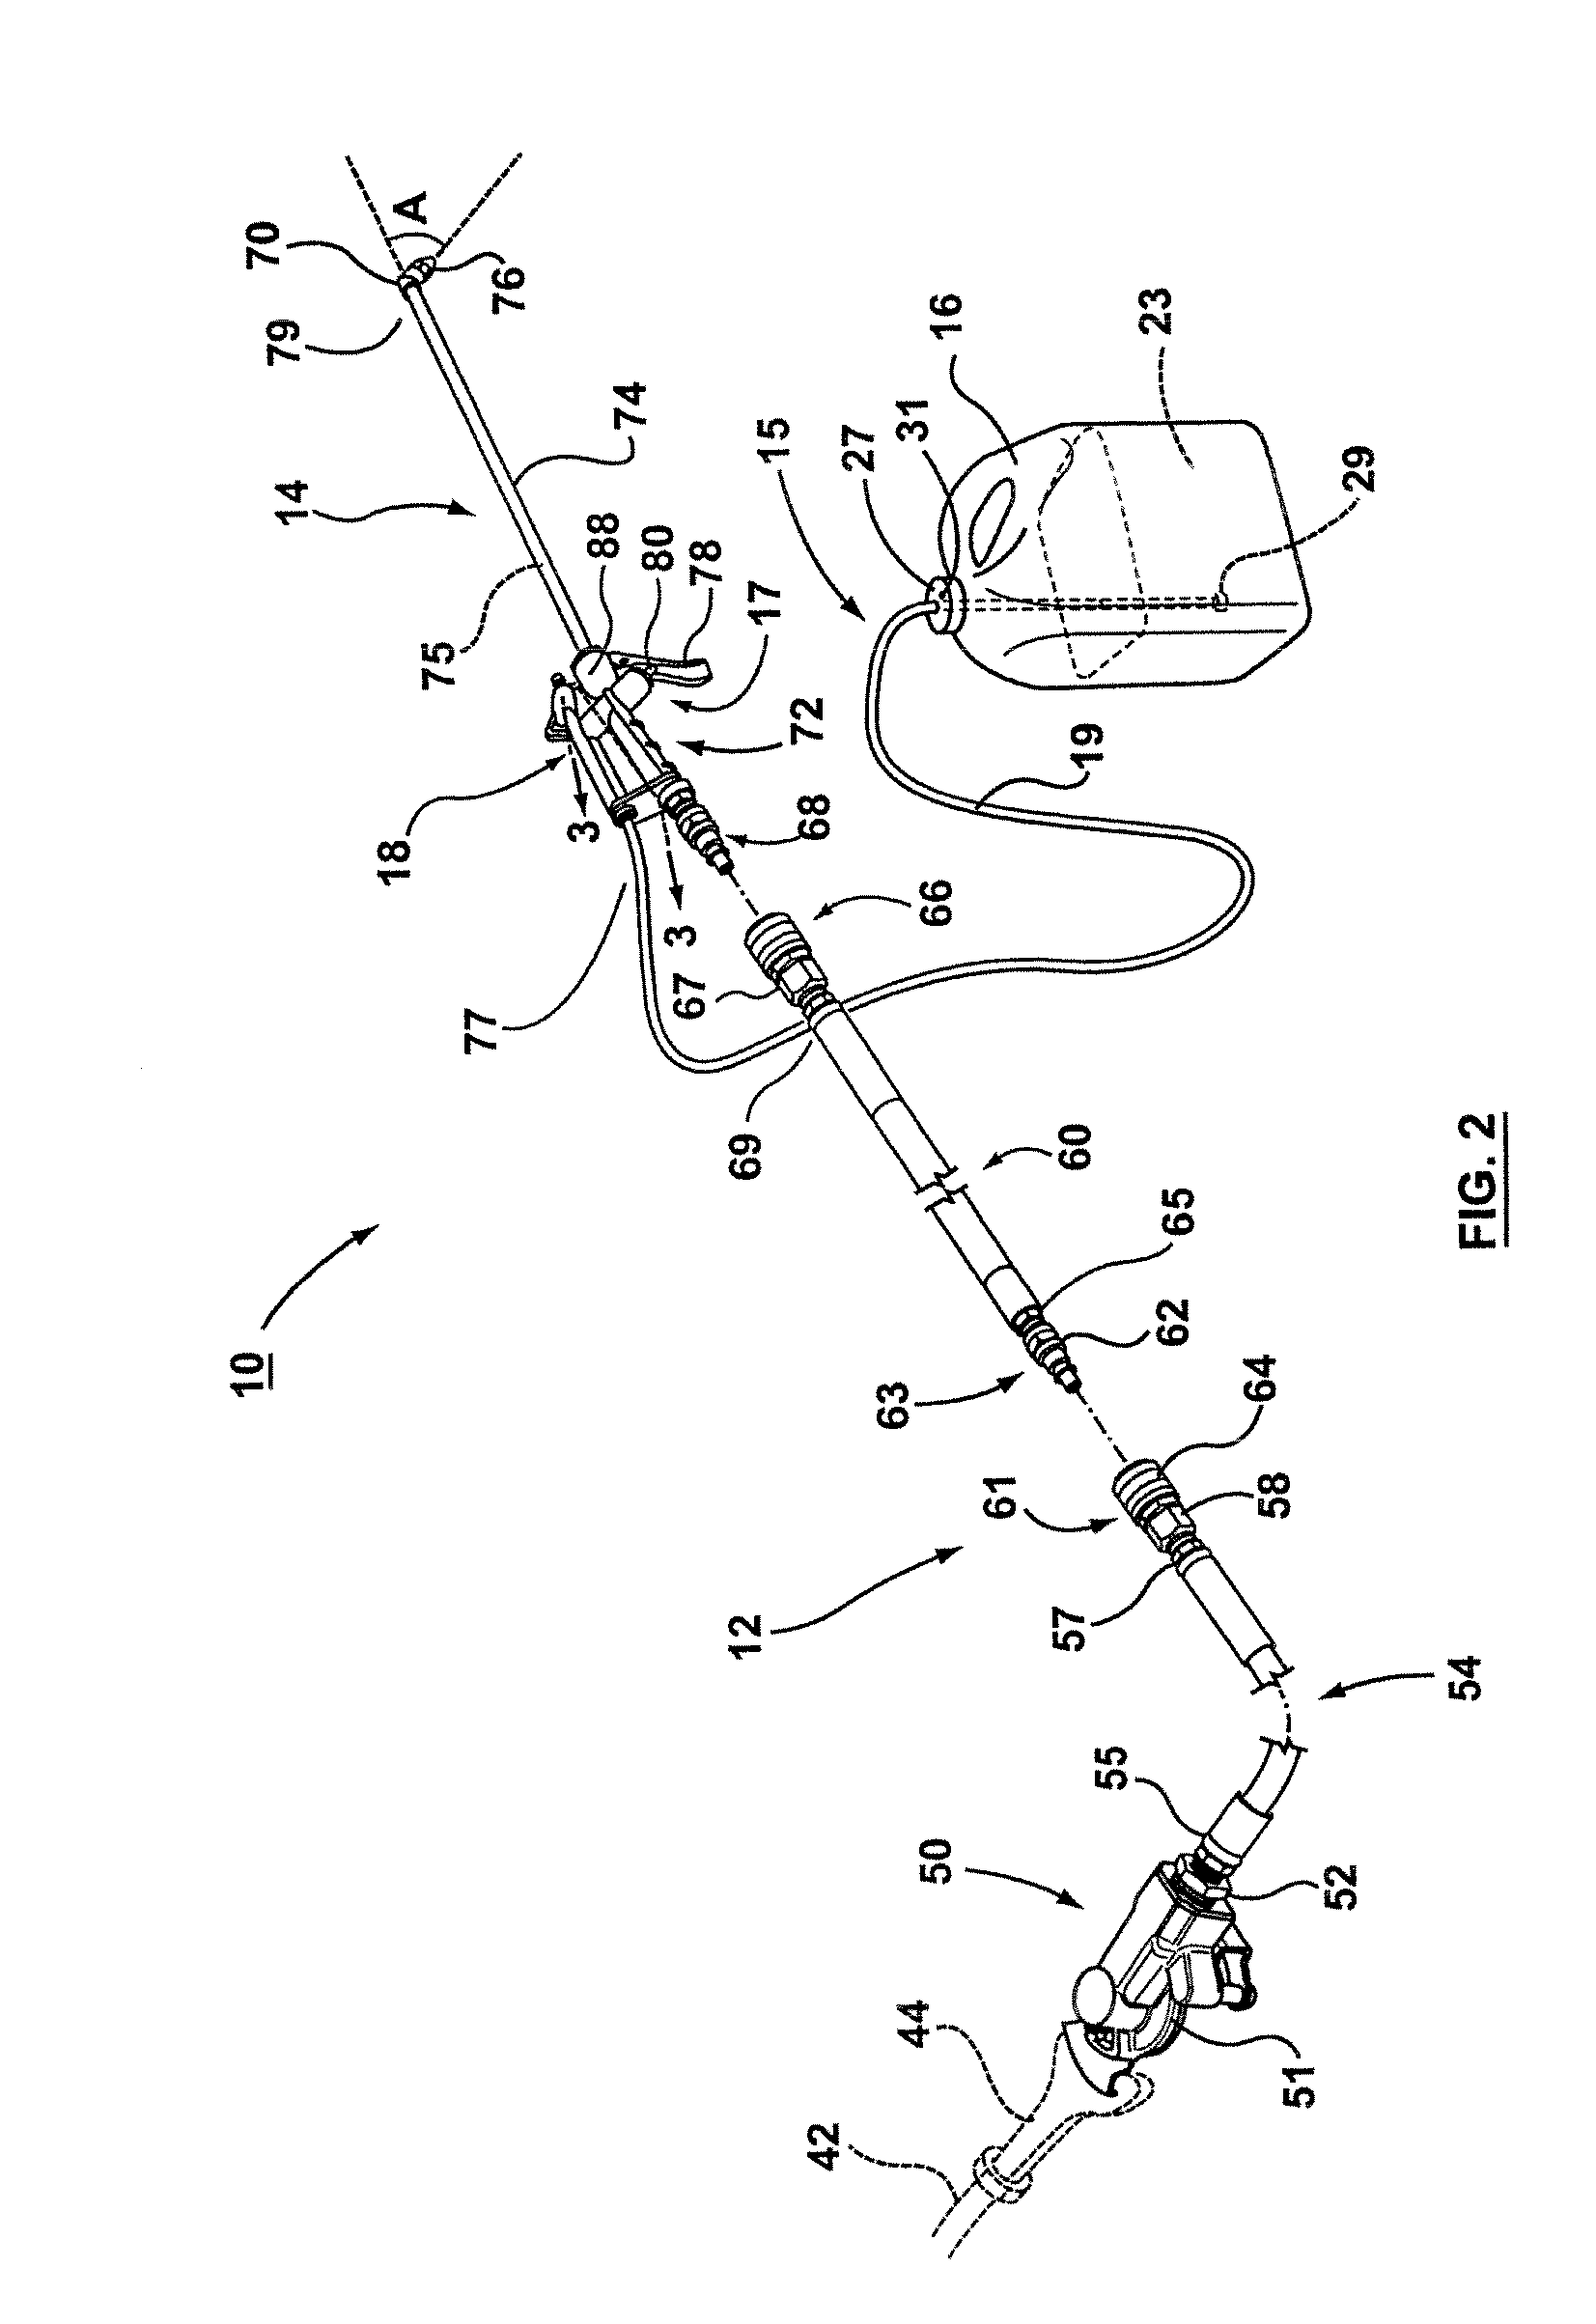 Apparatus and method for cleaning the interior of transport truck trailers